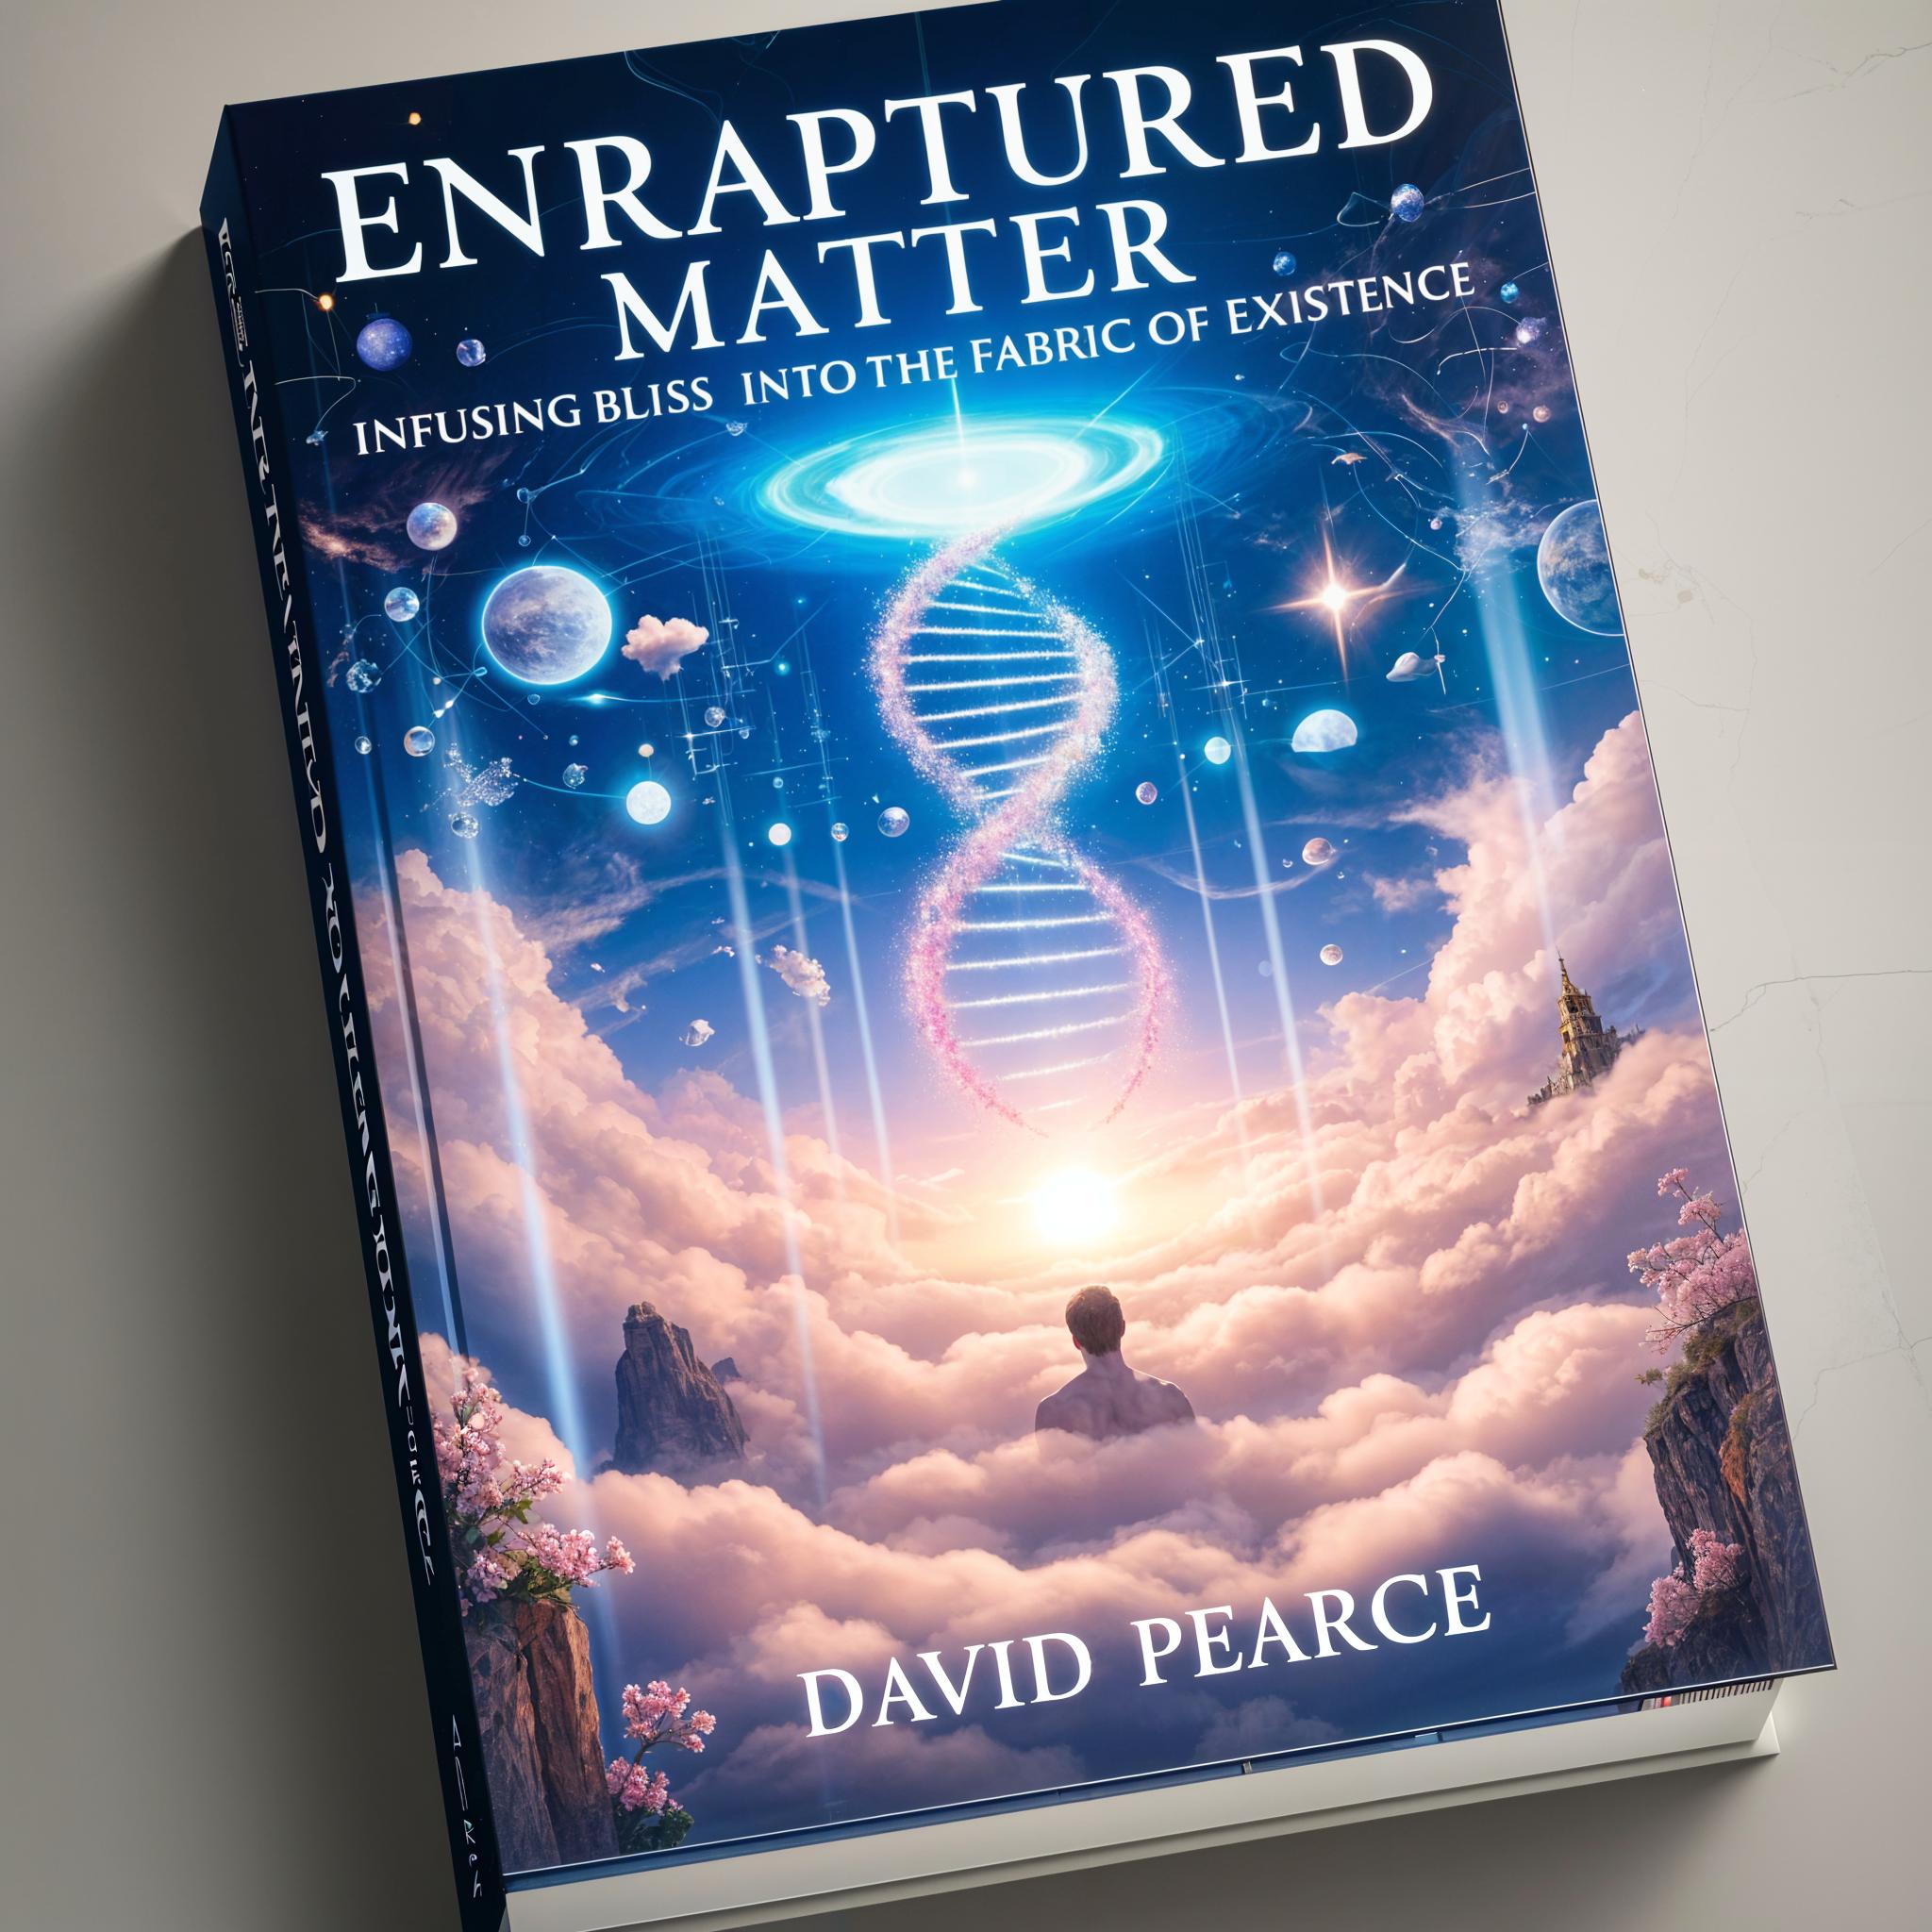 Enraptured Matter: Infusing Bliss into the Fabric of Existence by David Pearce